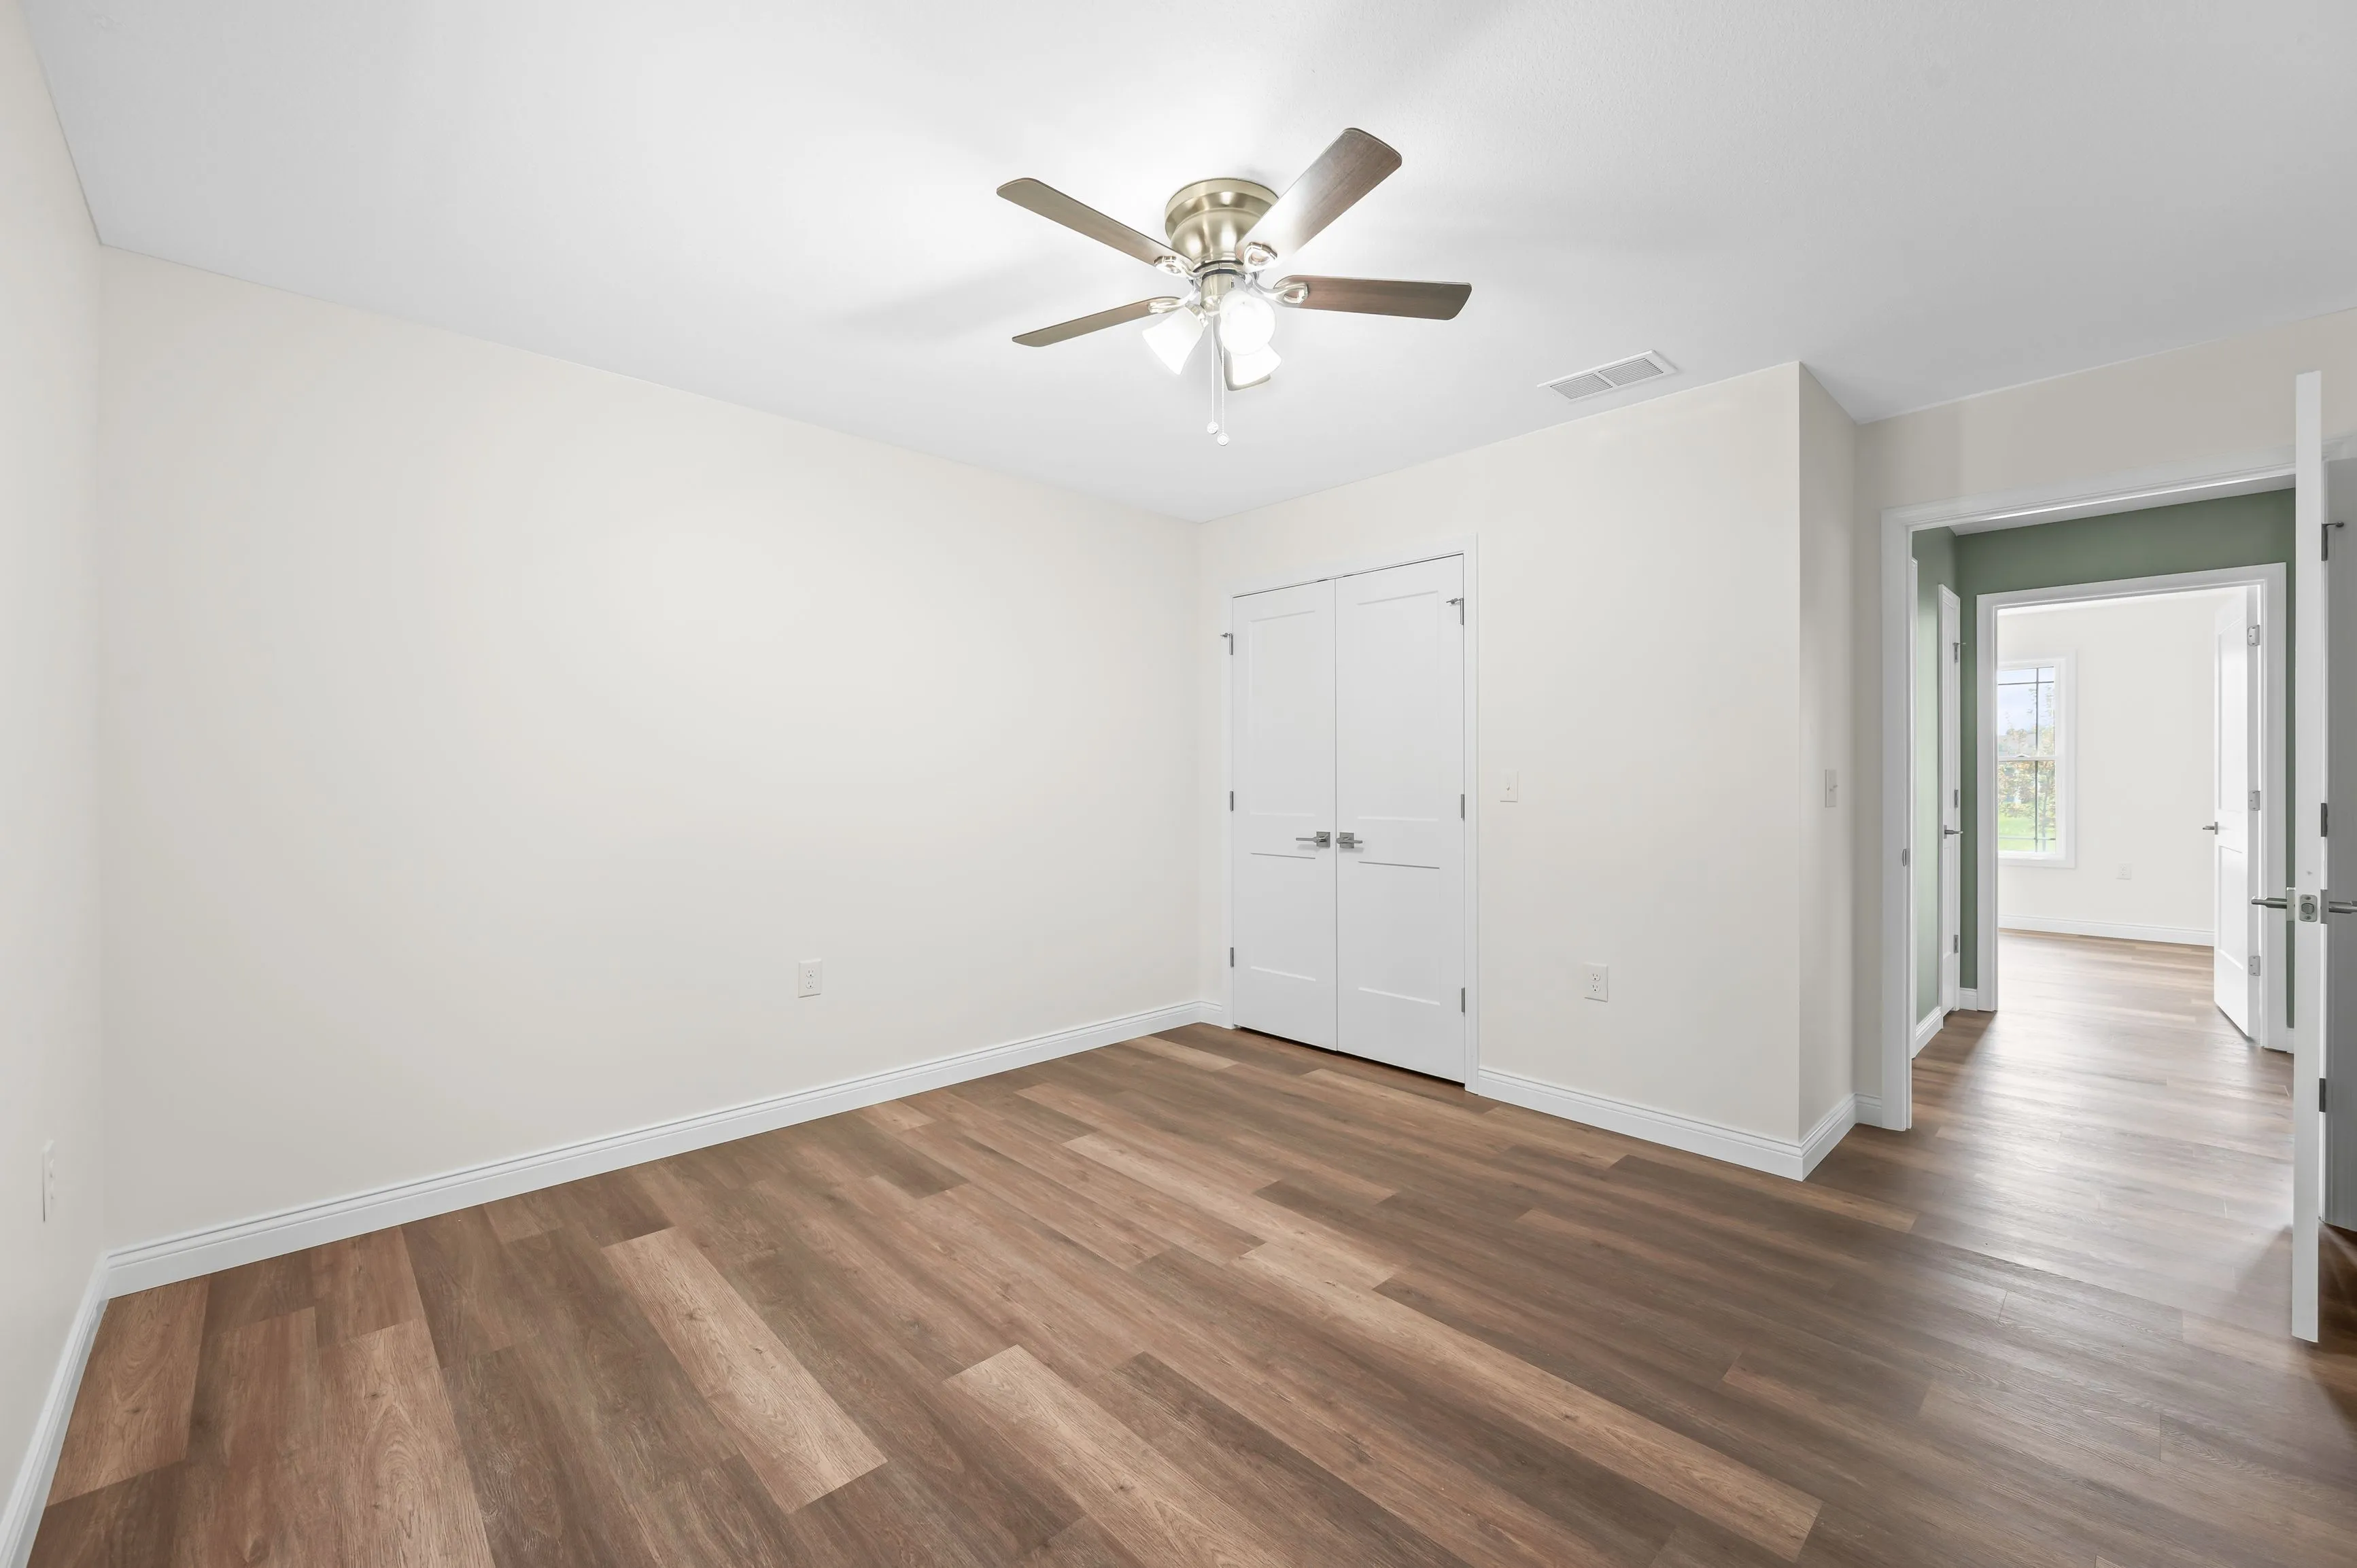 Bright, empty room with white walls, wood flooring, a ceiling fan with lights, and open doors leading to adjacent rooms.